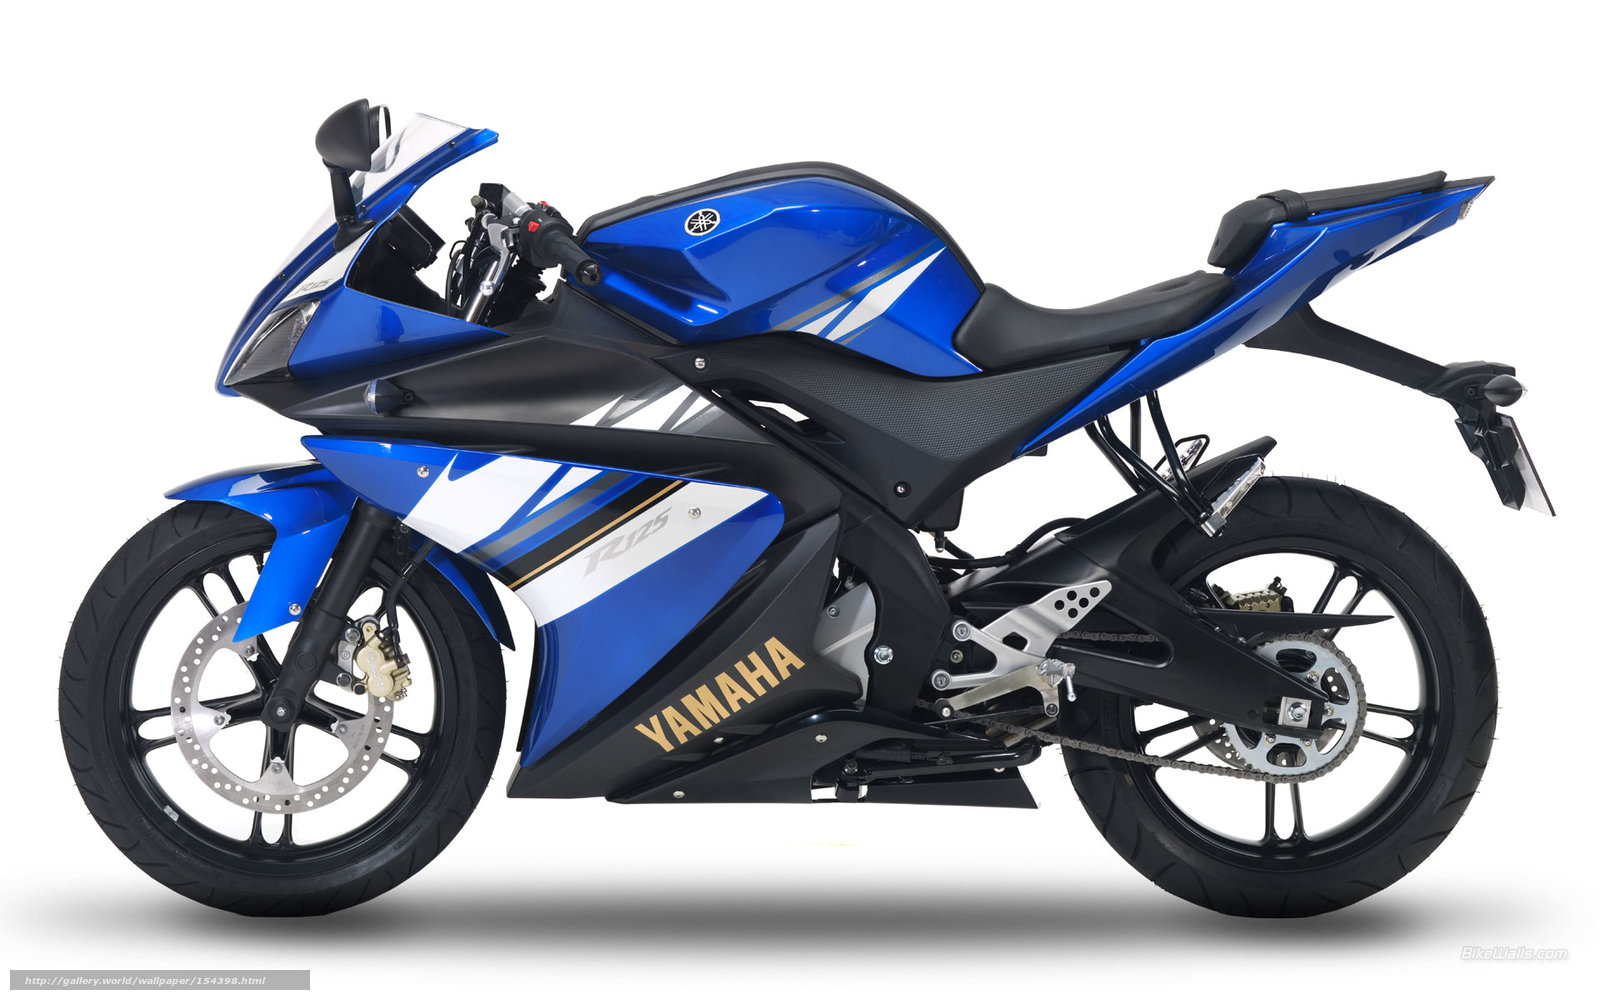 Yamaha Yzf R125 HD Wallpaper Pictures Gallery All